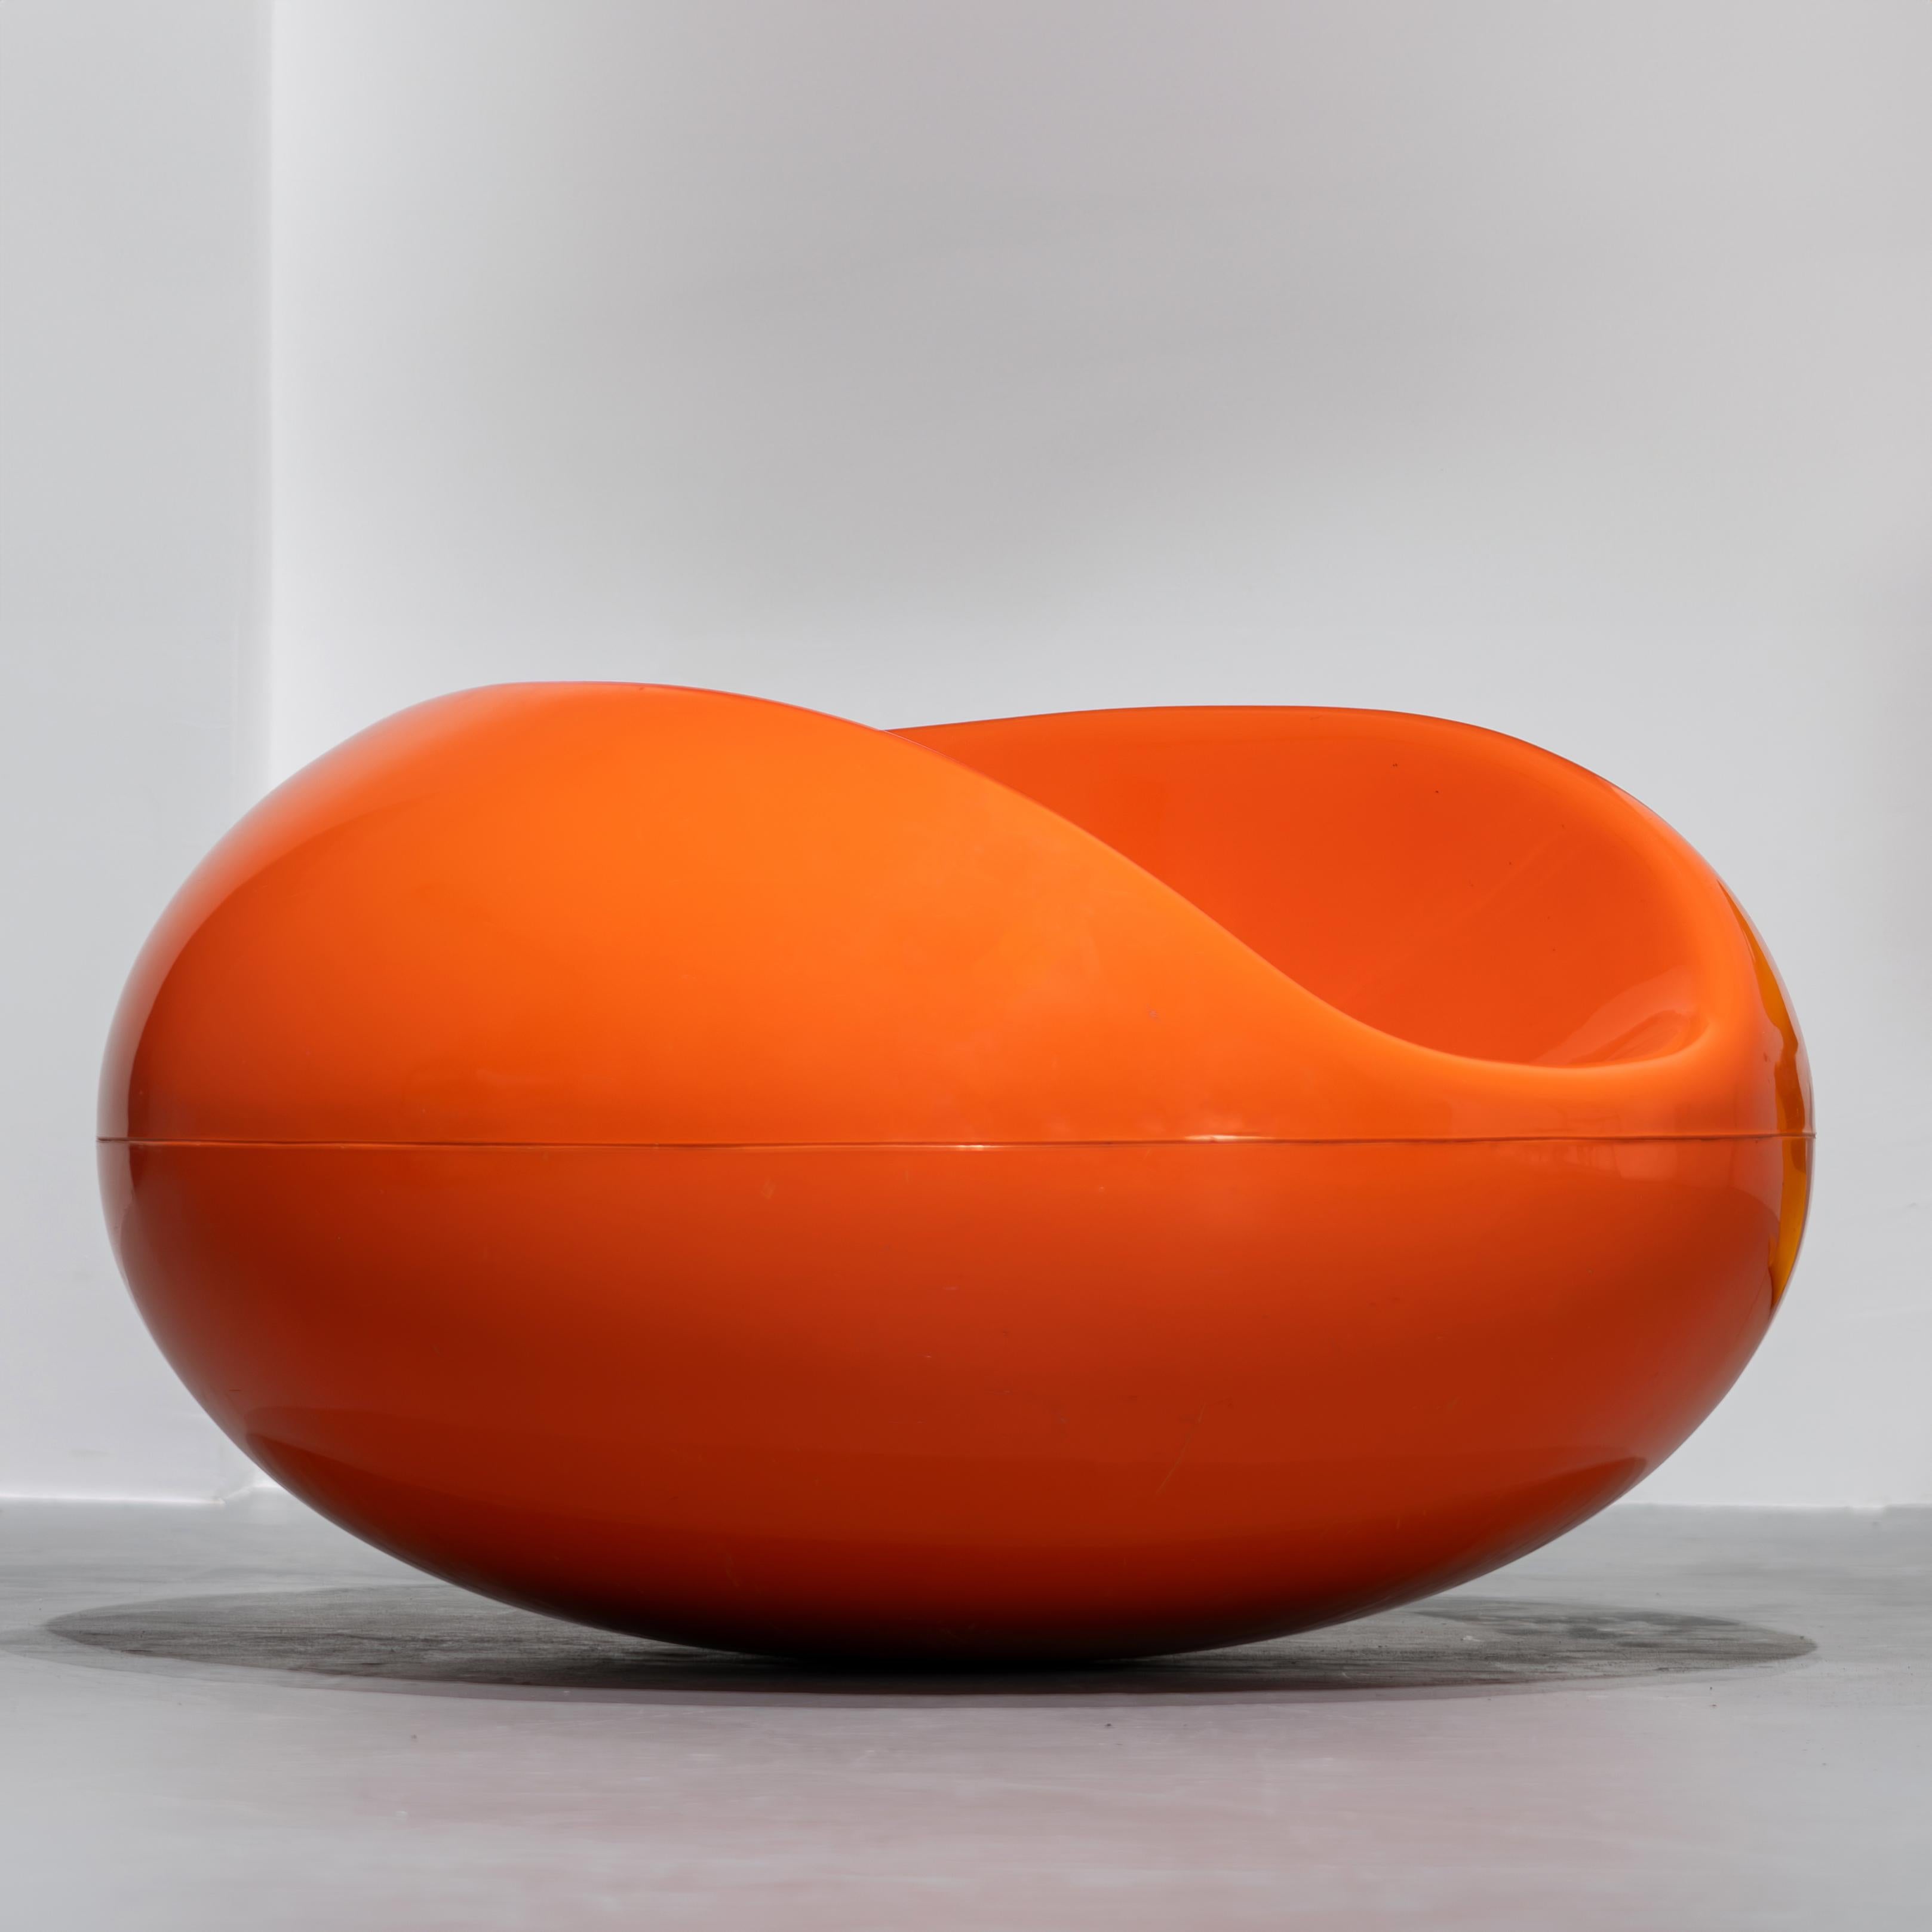 Eero Aarnio - 1st series Pastil Chair in bright orange, 1967 by Asko, Finland.

Eero Aarnio made the first prototype of the Pastil chair out of polystyrene, which helped him to verify the measurements, ergonomics and rocking ability. 

In 1968 he